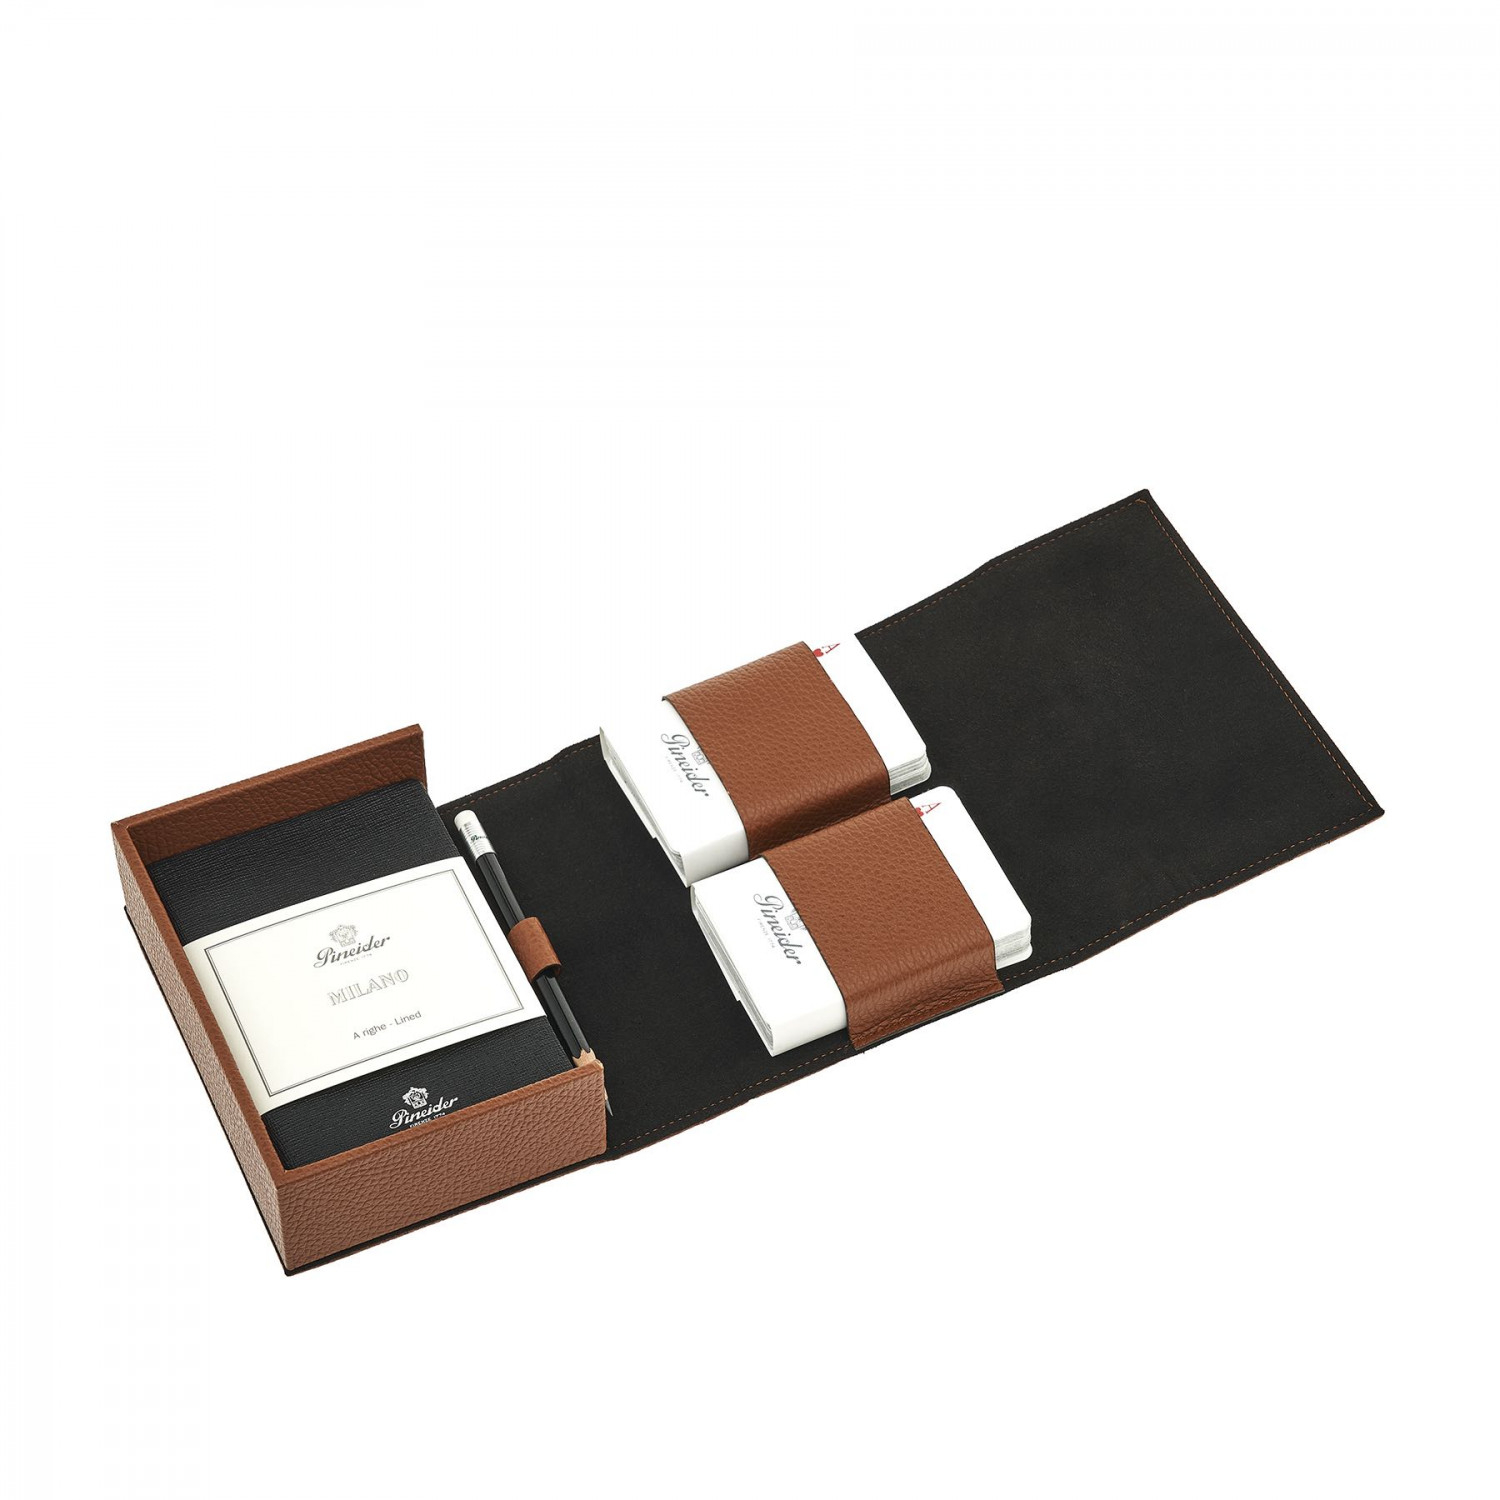 Burraco playing cards set in leather_Small